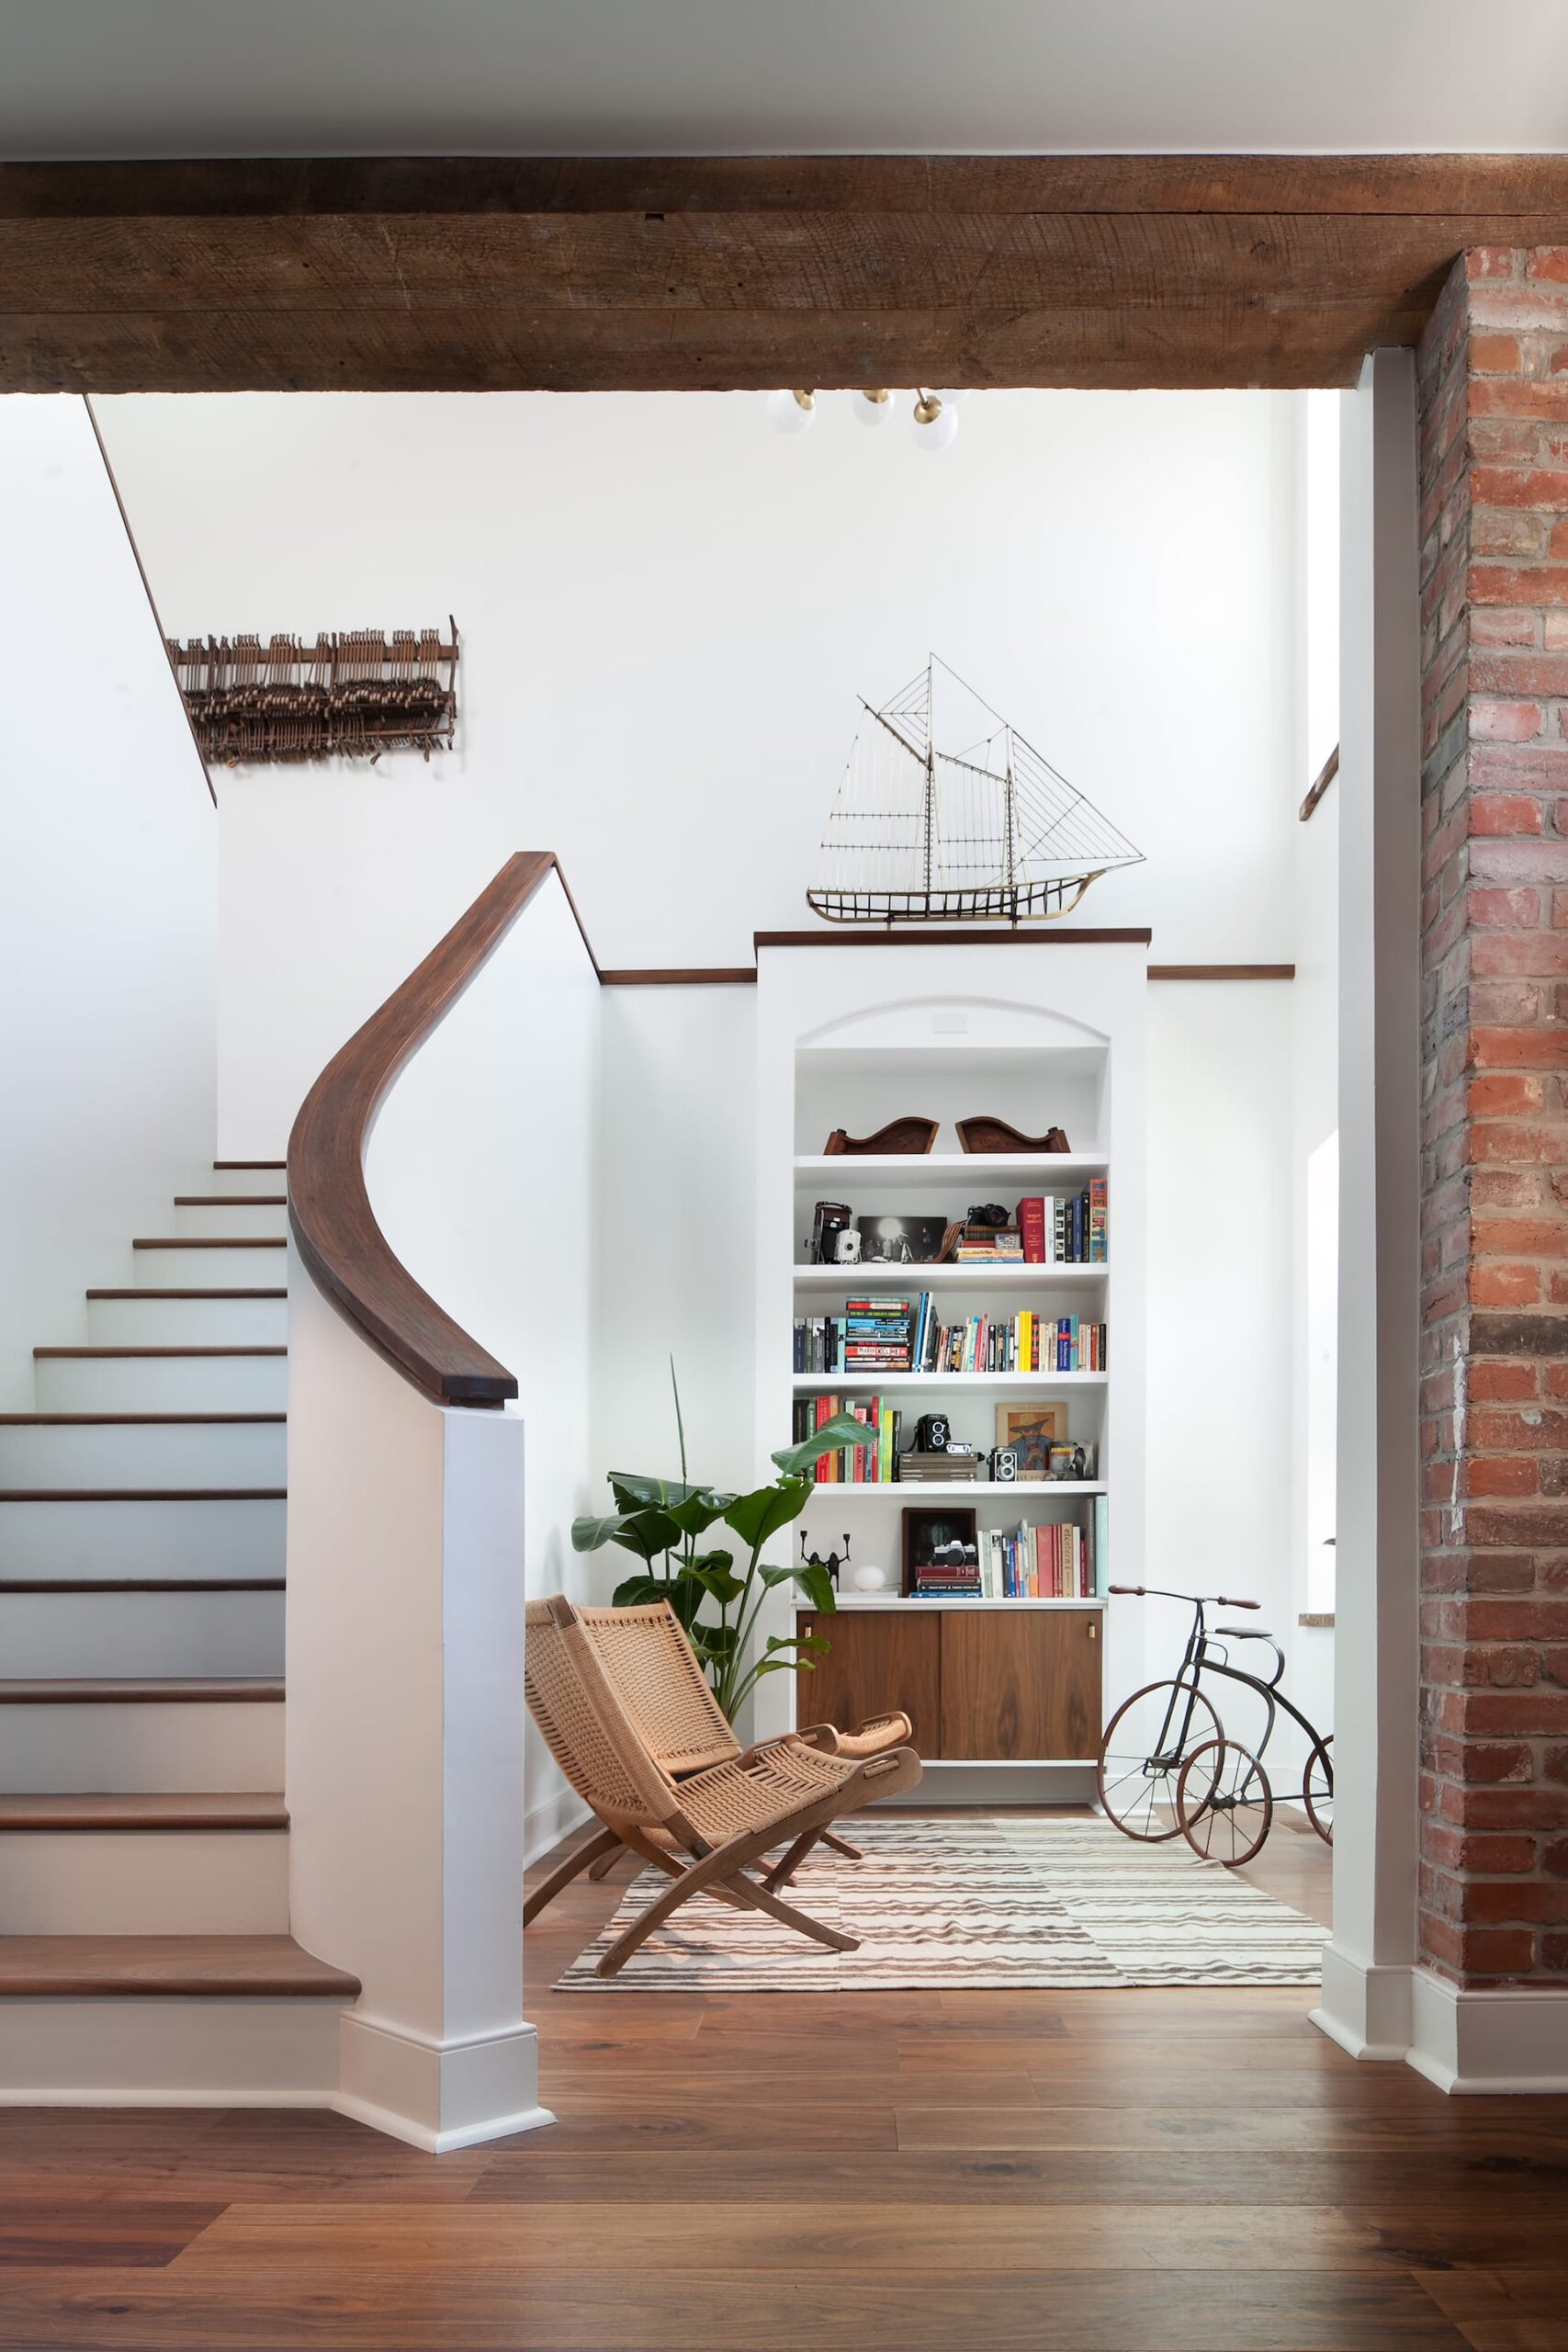 town house renovation in washington dc by carve architects